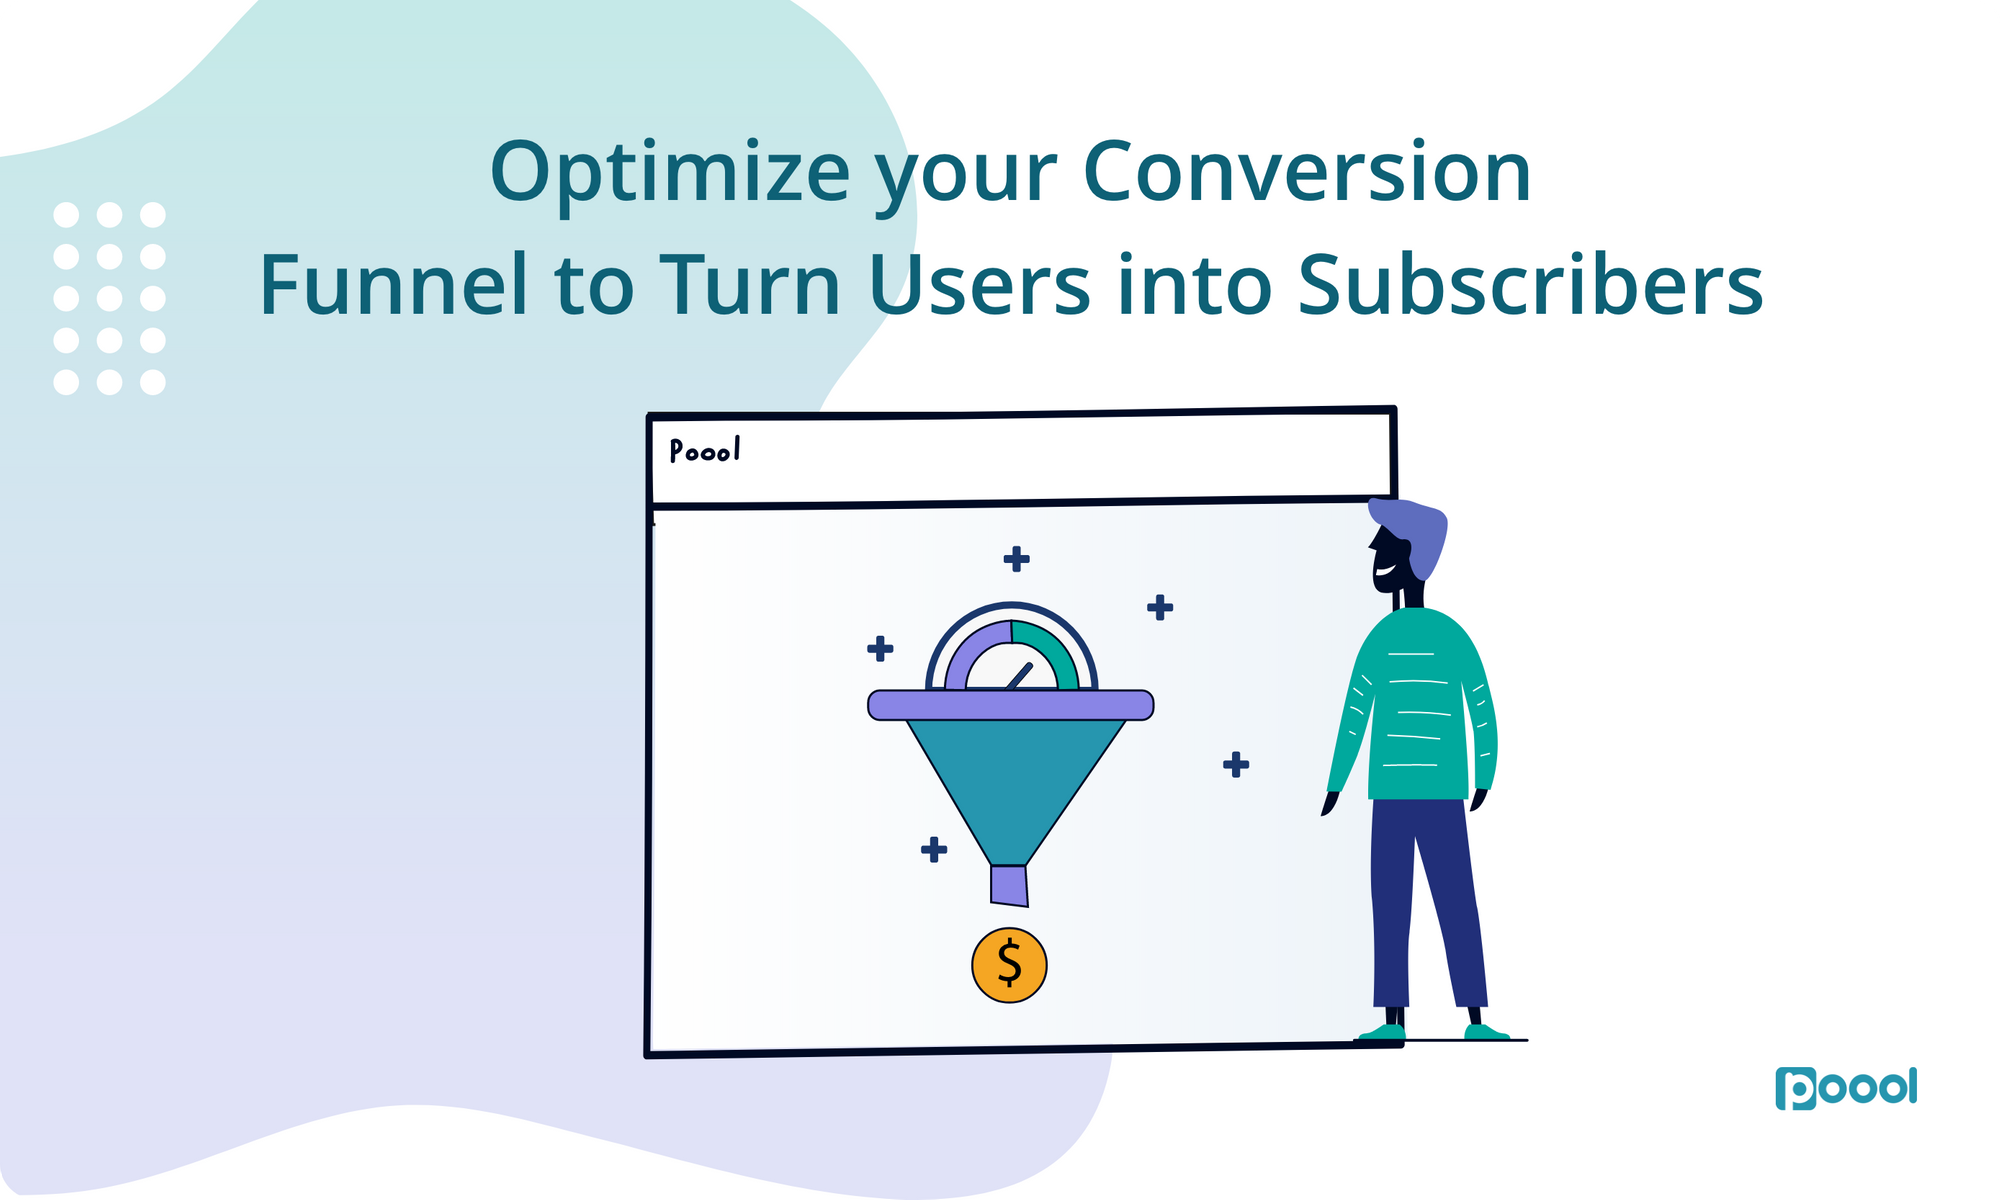 White Paper: Optimize your Conversion Funnel to Turn Users into Subscribers - Examples and Best Practices.